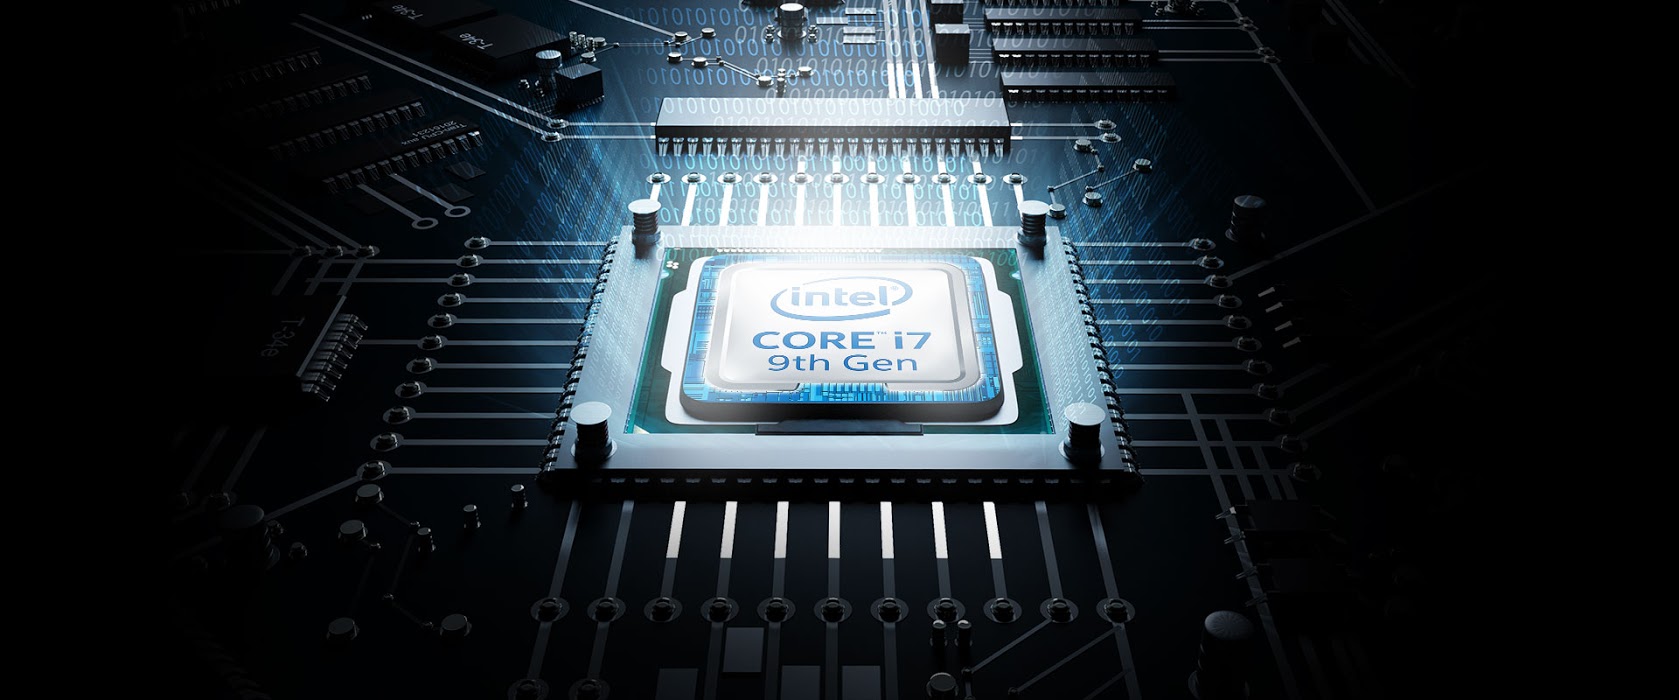 9th Gen Intel® Core™ i7 processors with the motherboard as background